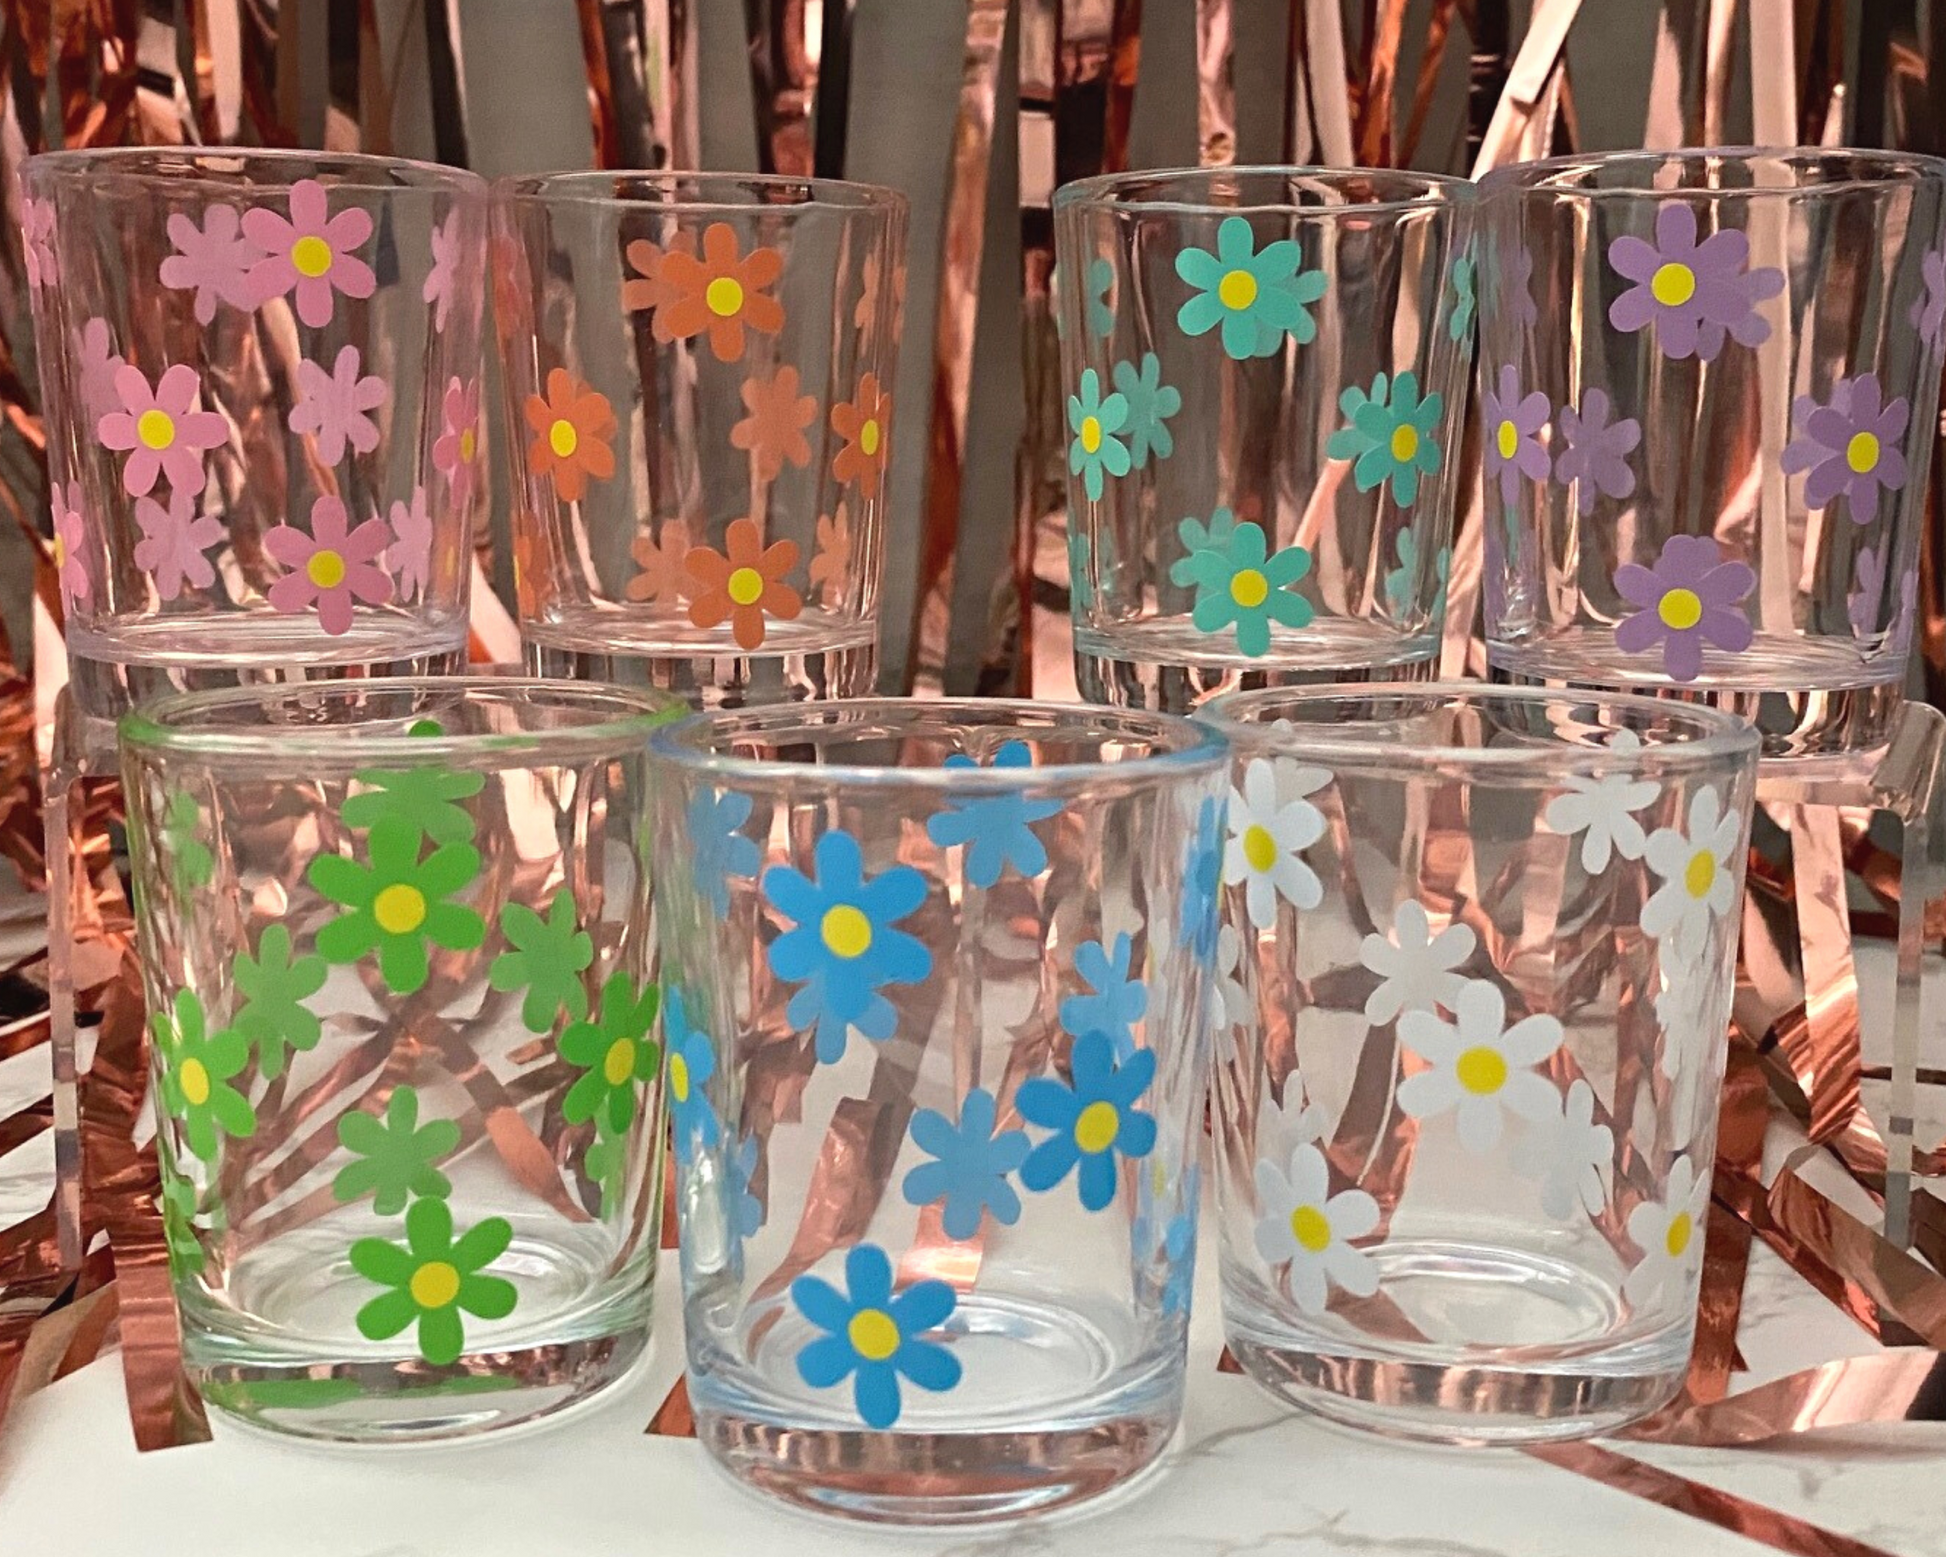 seven shot glasses with a daisy flower design on it in green, mint, blue, orange, purple, pink and white with yellow dots in the middle, fun party background